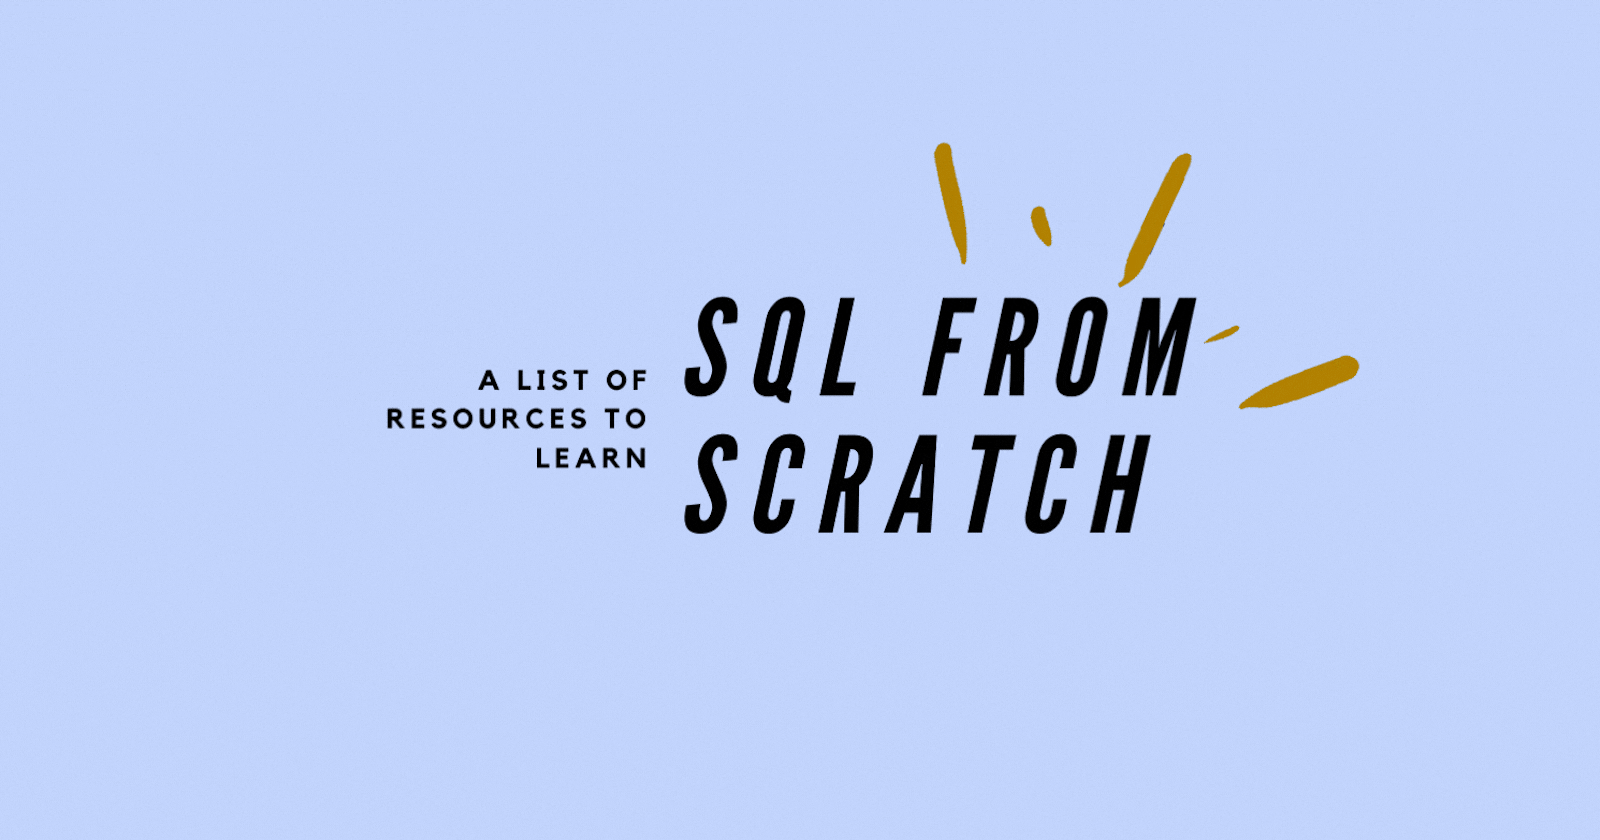 Resources to Learn SQL from Scratch